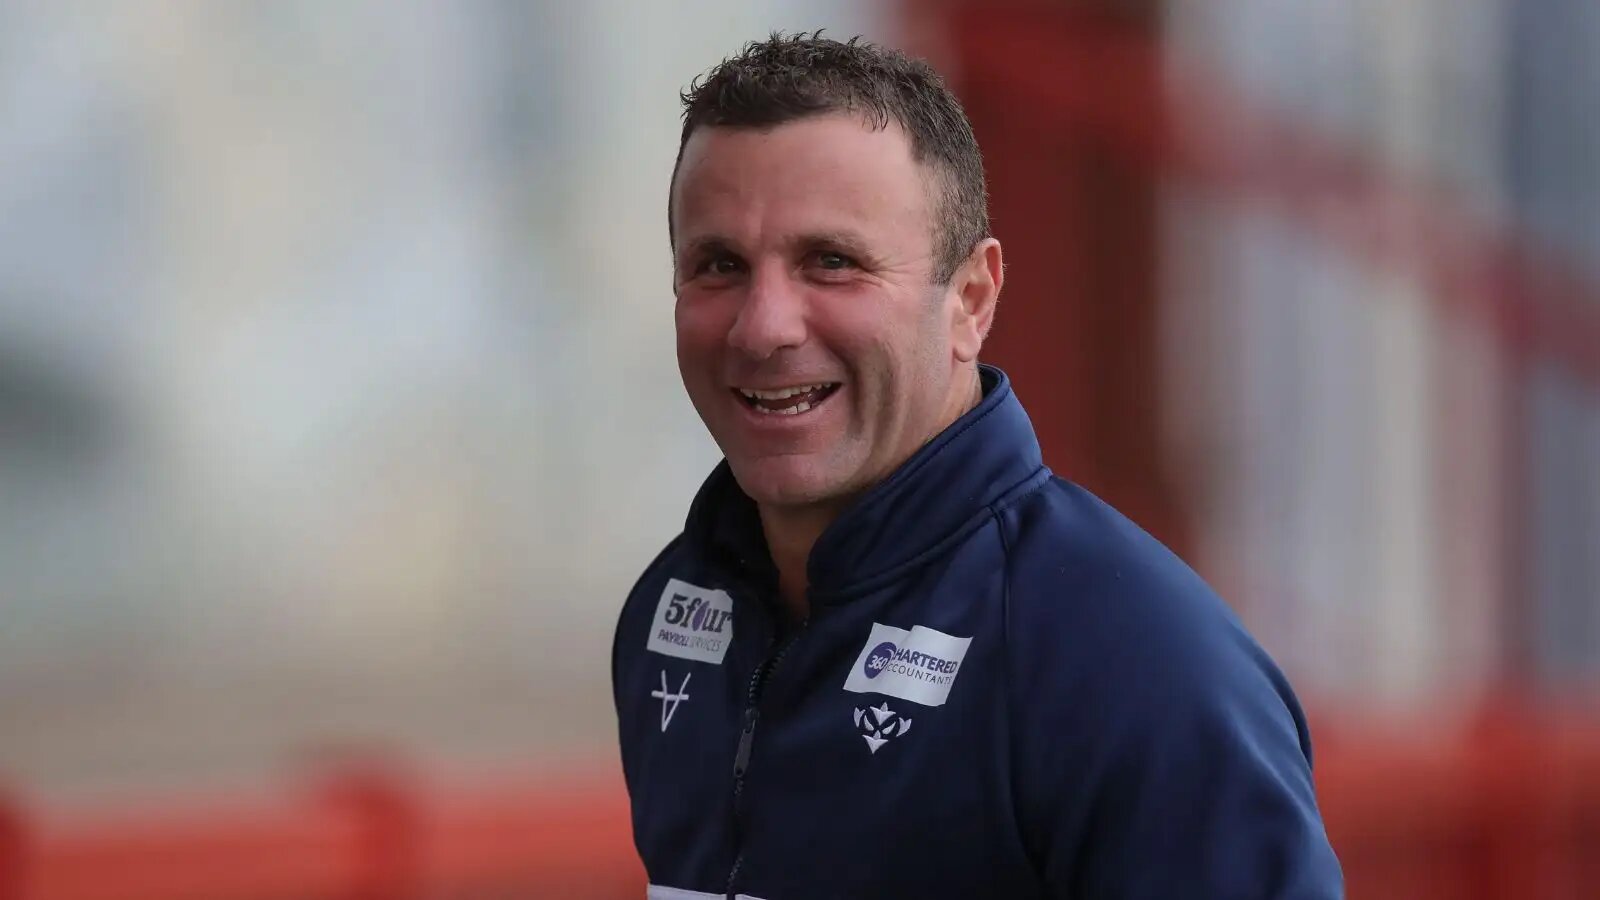 Hull KR manager takes a risk with a significant roster addition…